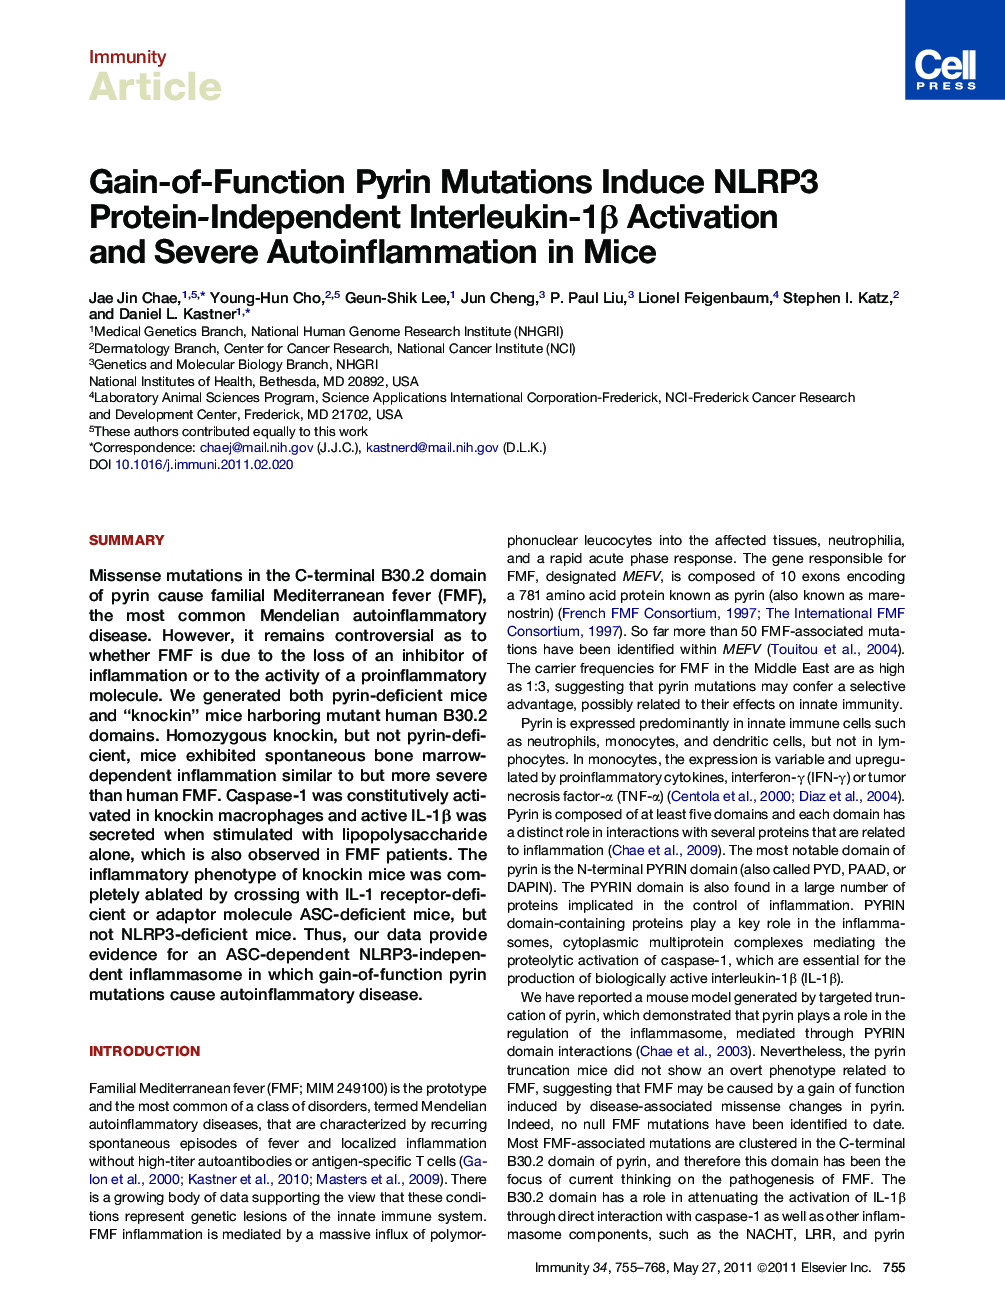 Gain-of-Function Pyrin Mutations Induce NLRP3 Protein-Independent Interleukin-1β Activation and Severe Autoinflammation in Mice